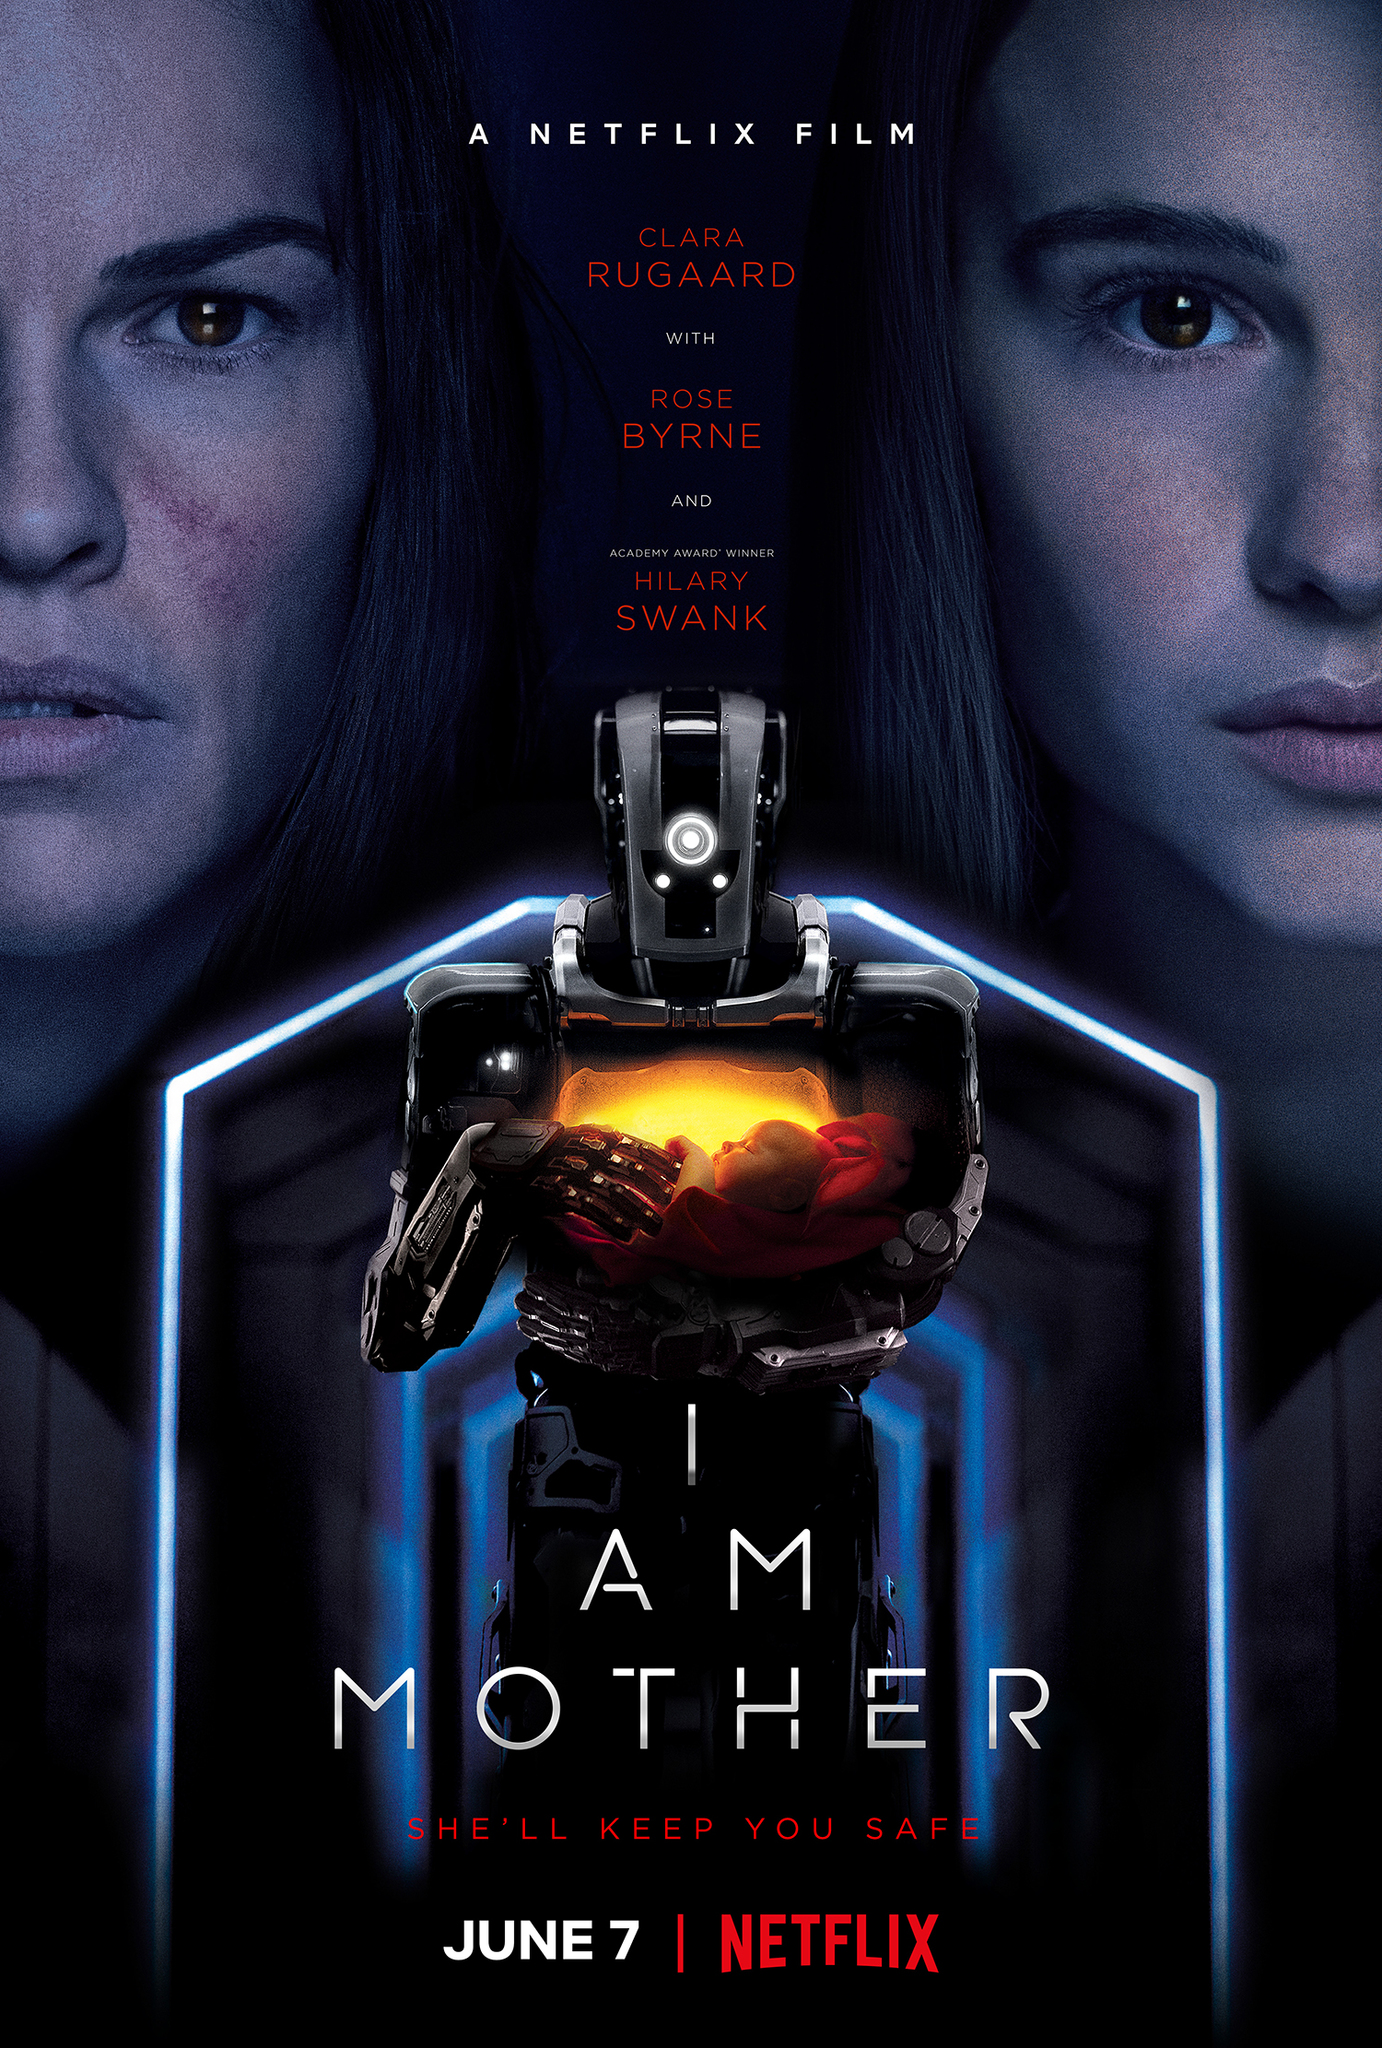 I Am Mother (2019) sci-fi movies on Netflix